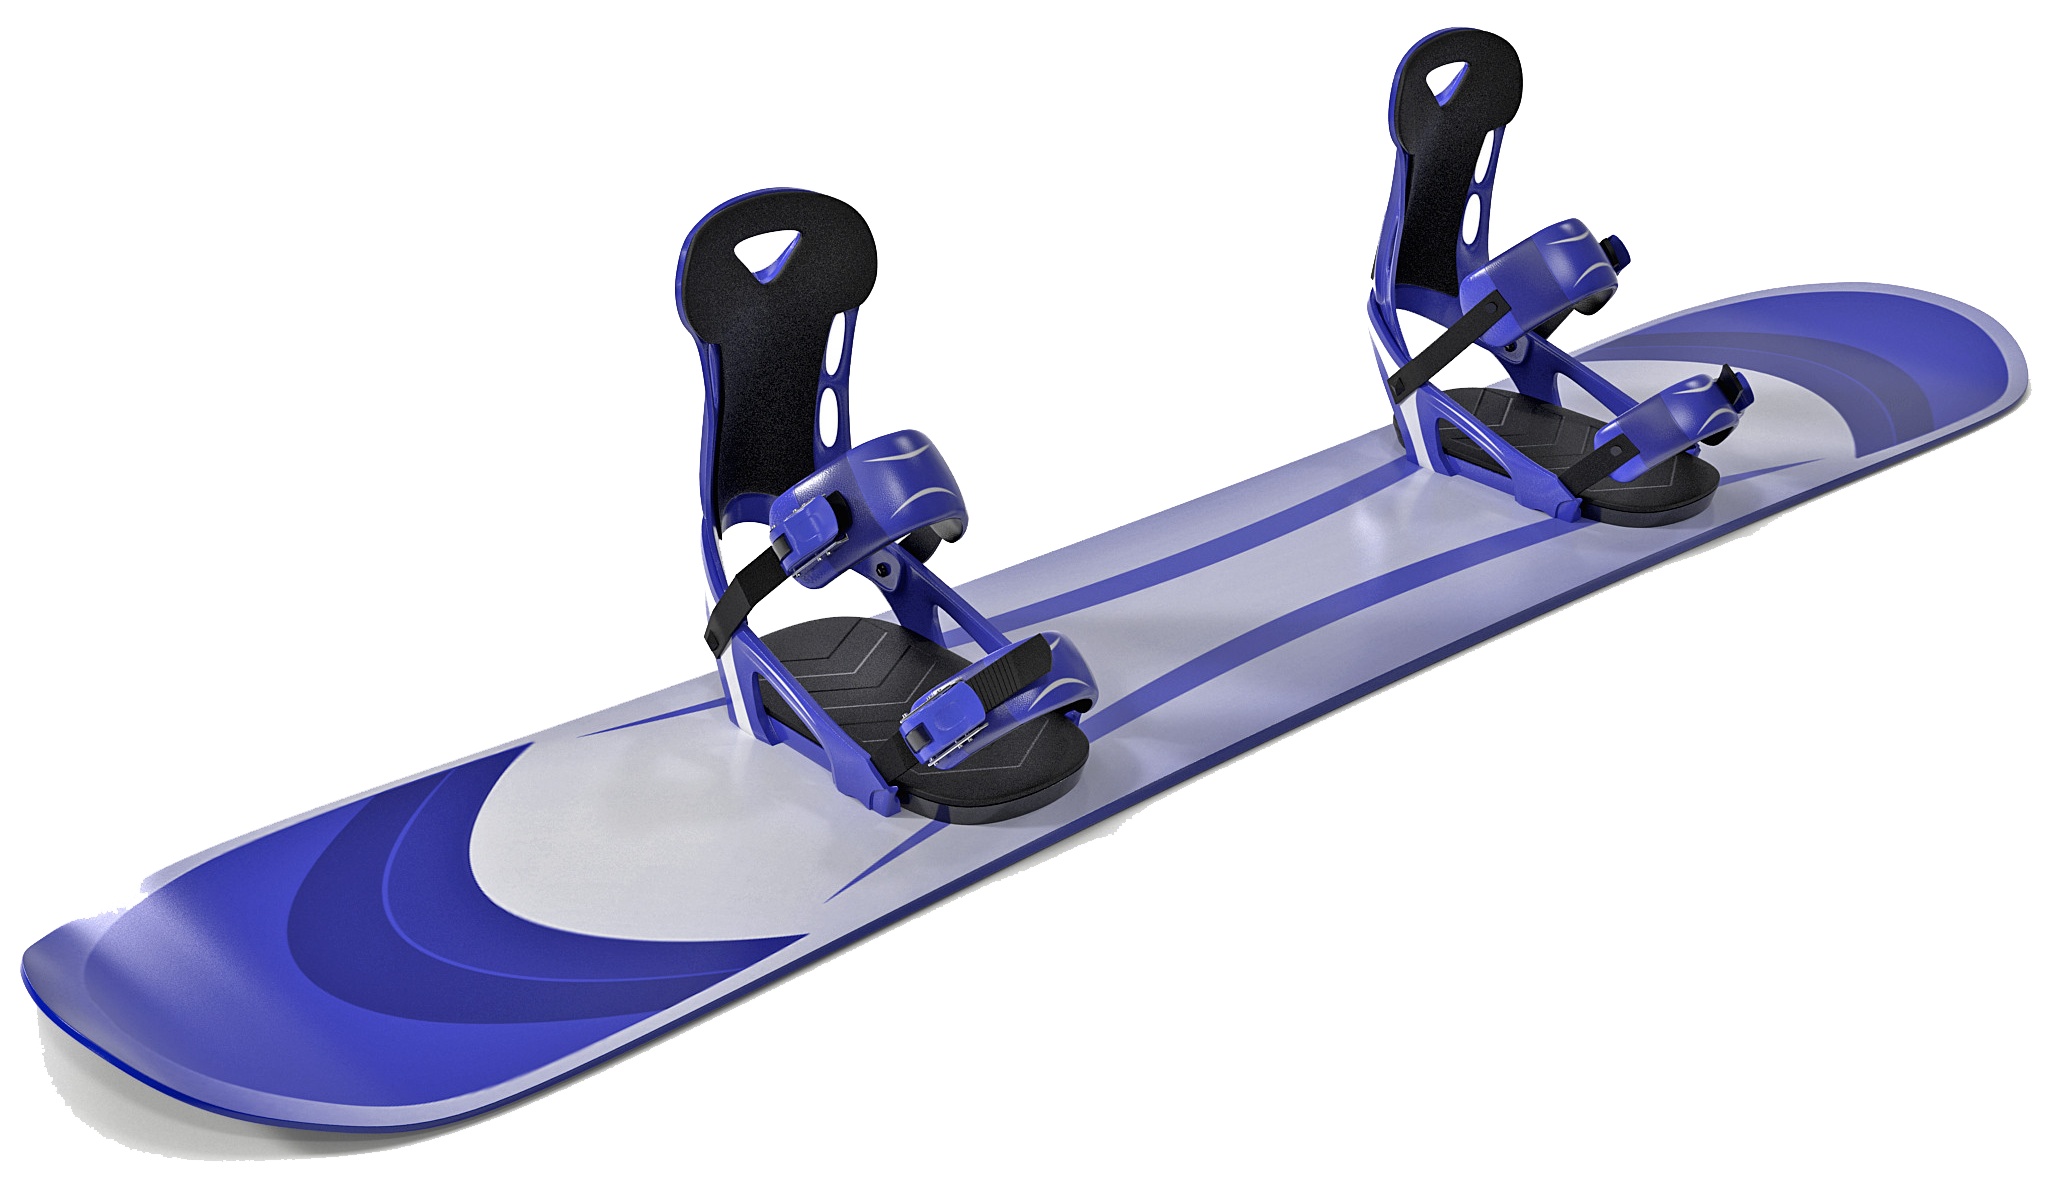 Snowboard PNG Images HD